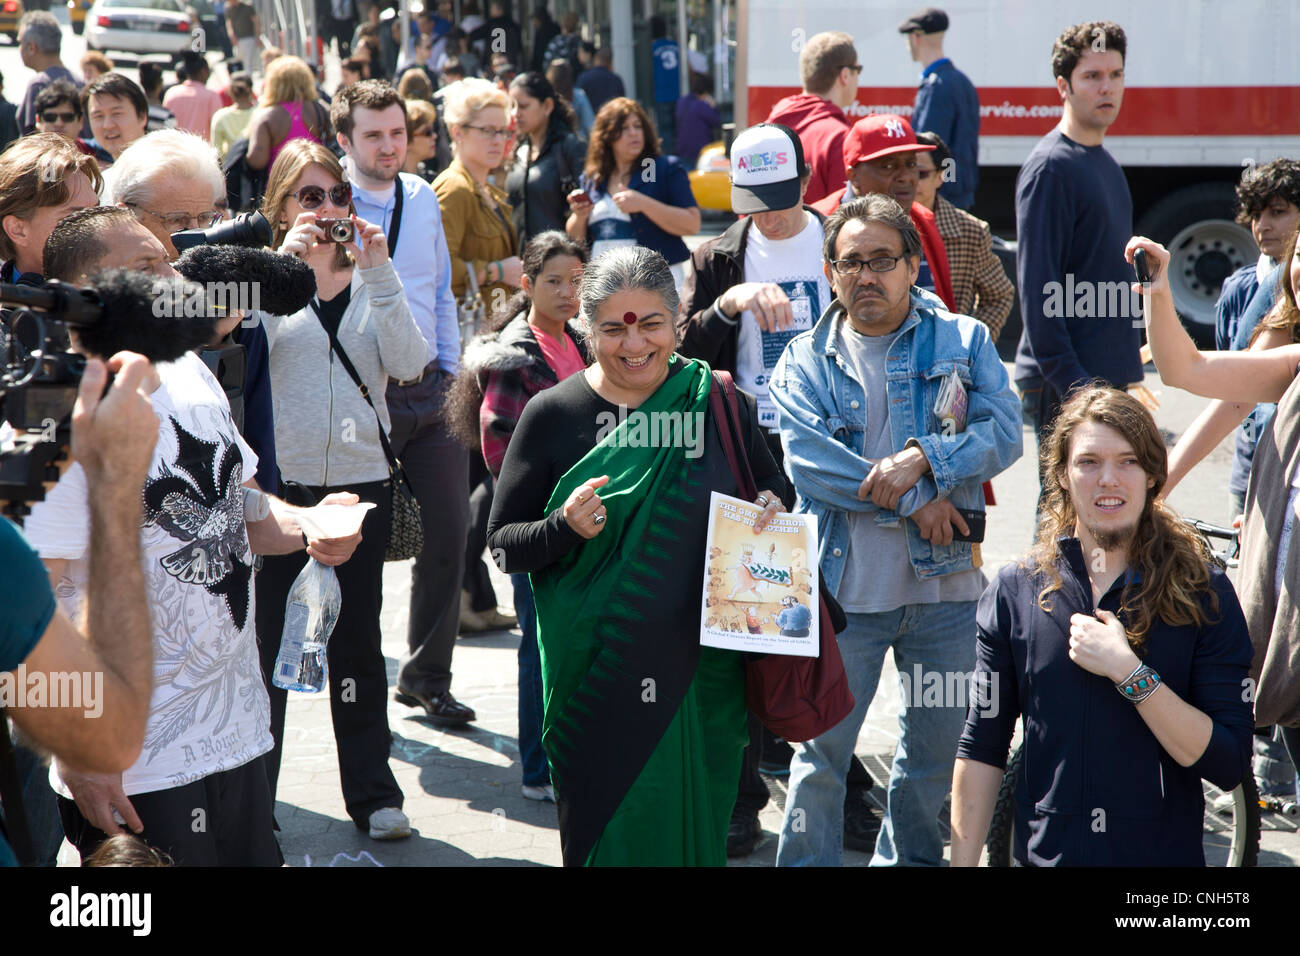 Vandana Siva, Indian environmental activist, speaks to Occupy Wall Street gathering at Union Square in NYC. Stock Photo